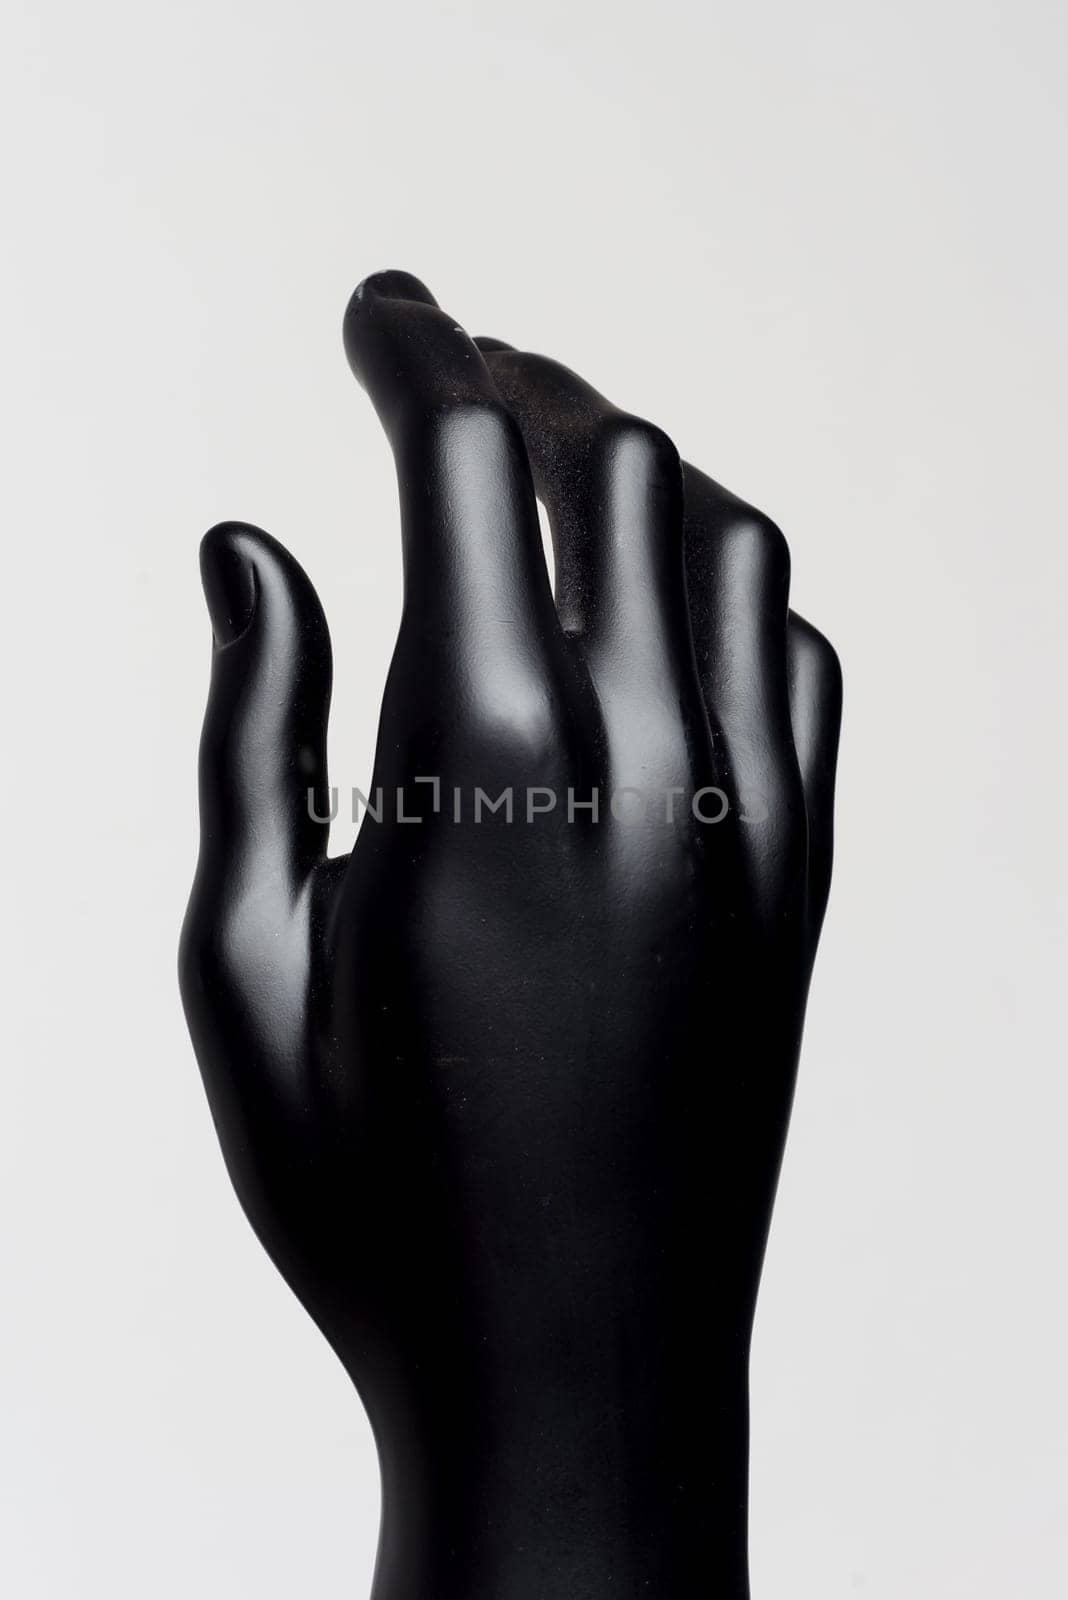 Hand of male black mannequin on a white background - image